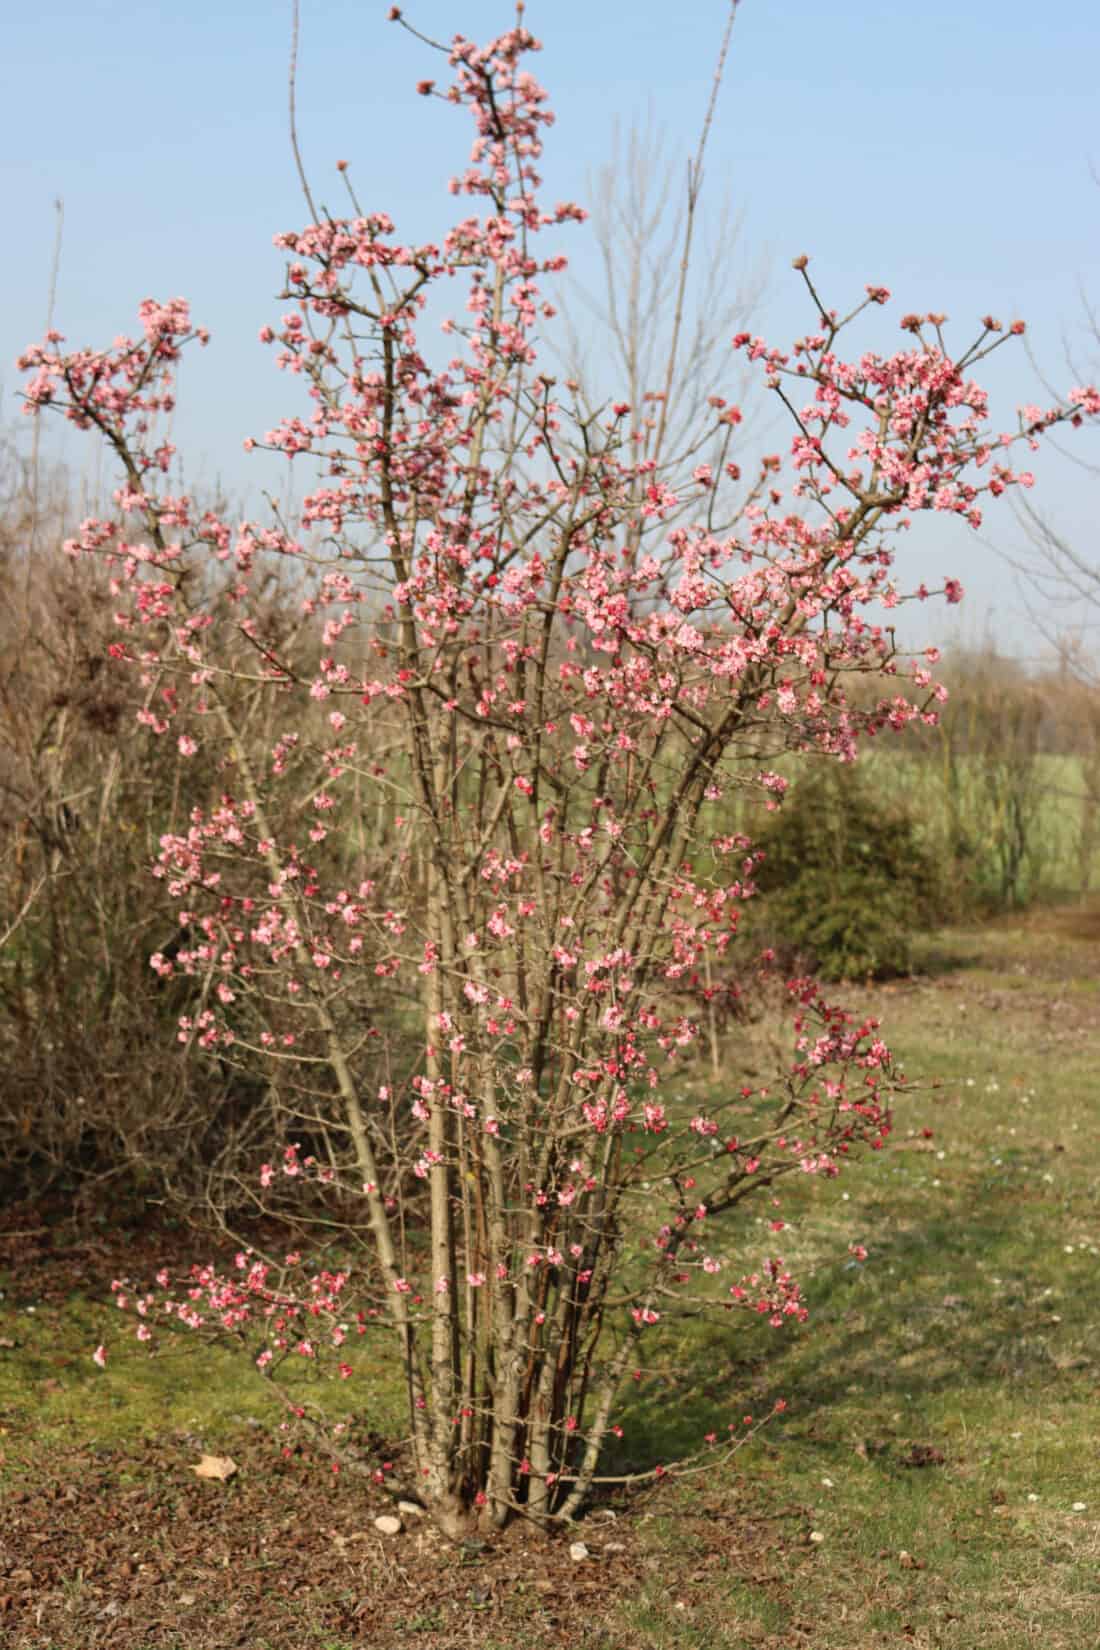 Viburnum bodnantense has a beautiful vase shape that is easy to maintain with very little pruning.